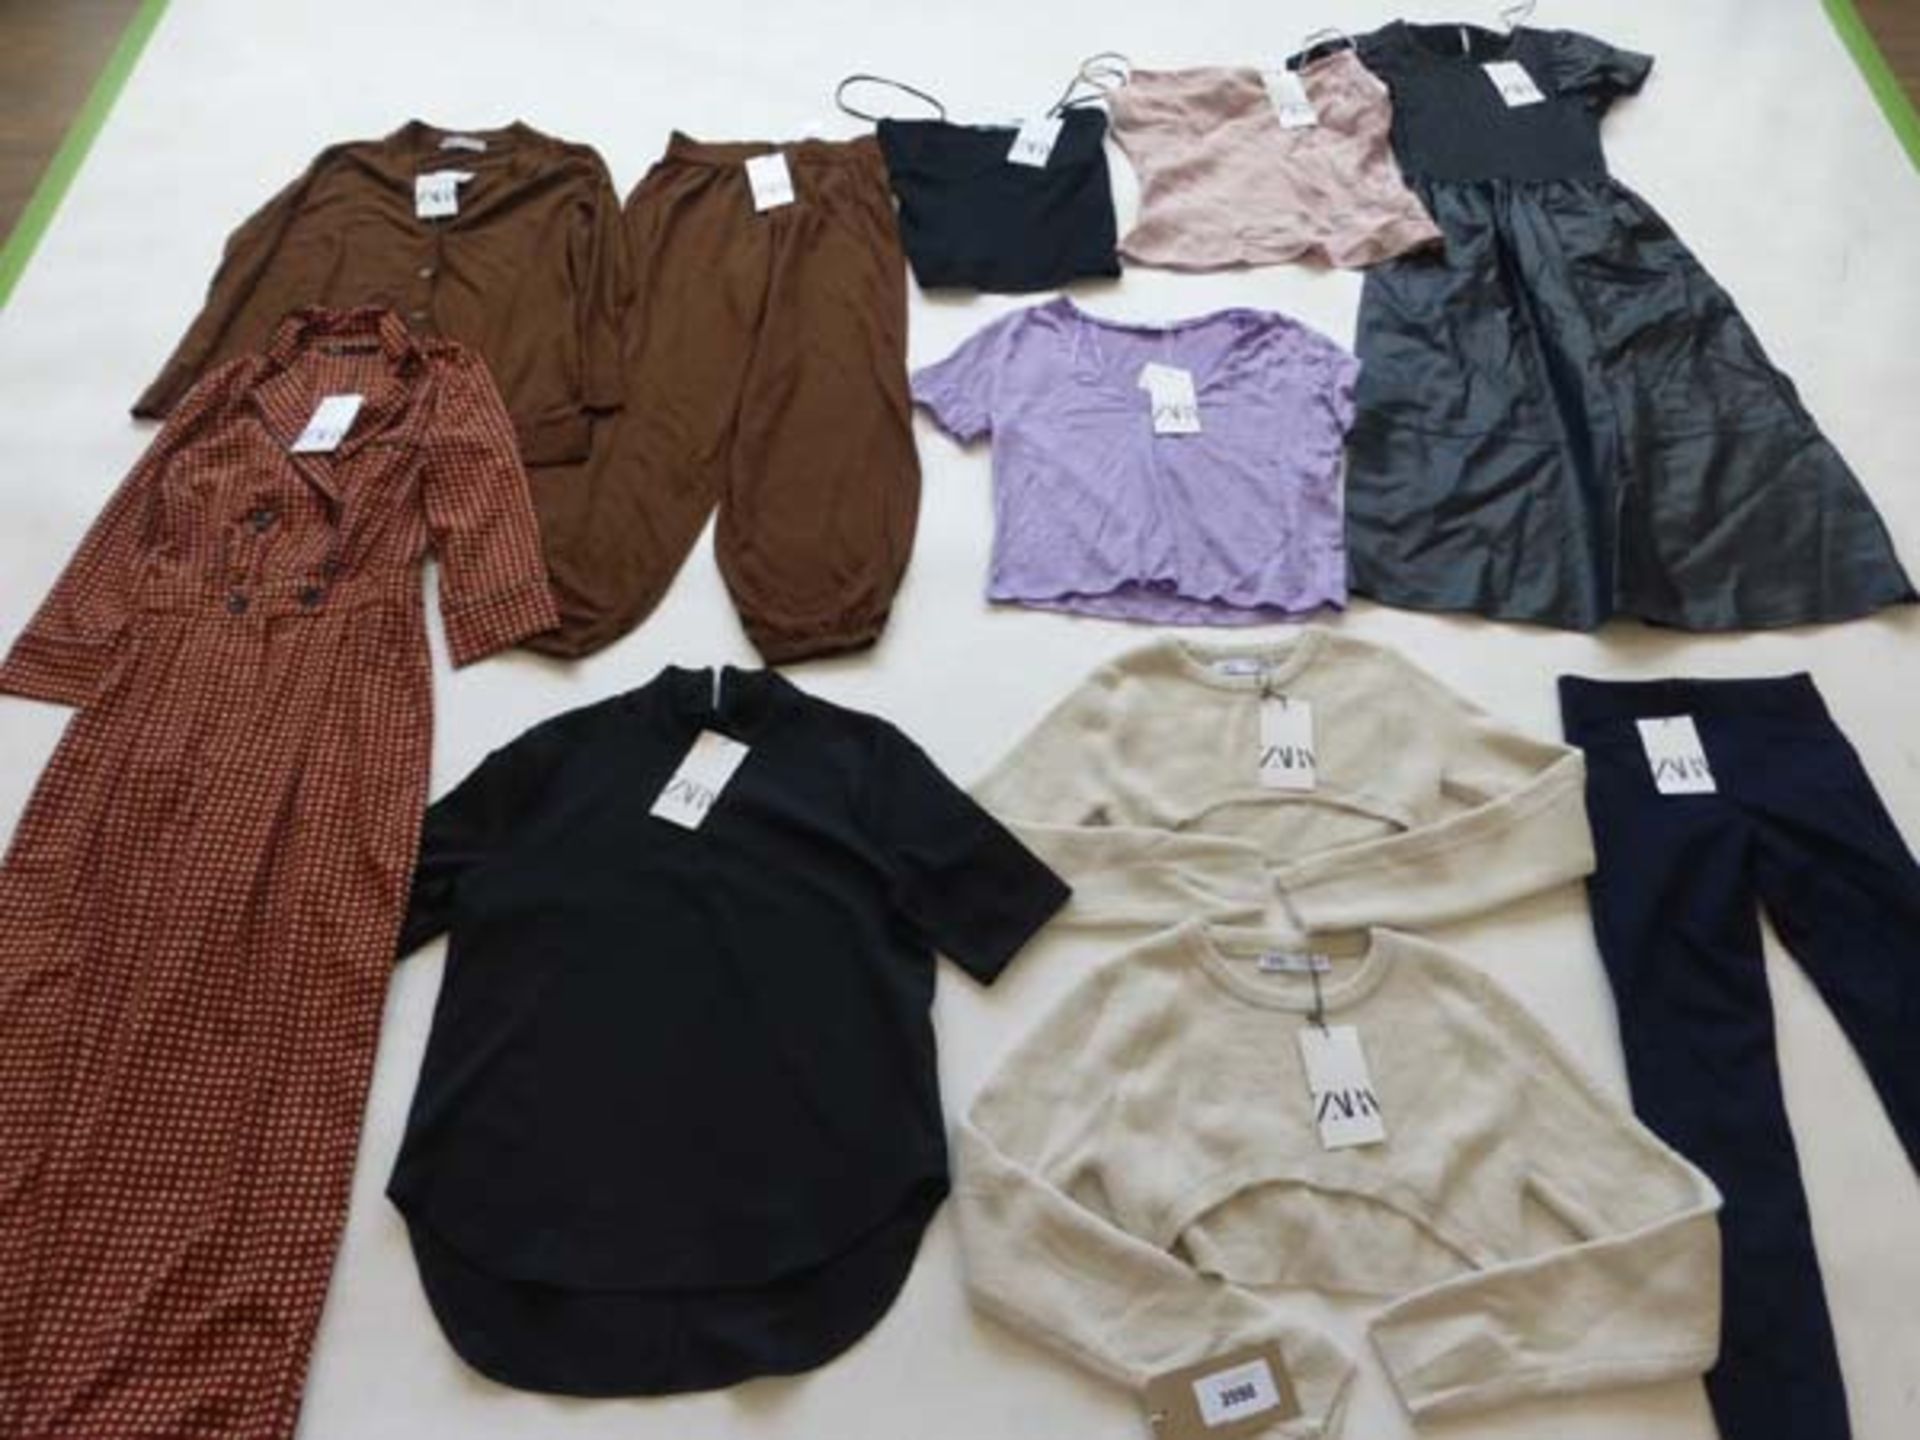 Selection of Zara clothing to include dresses, tops, jumpers, etc